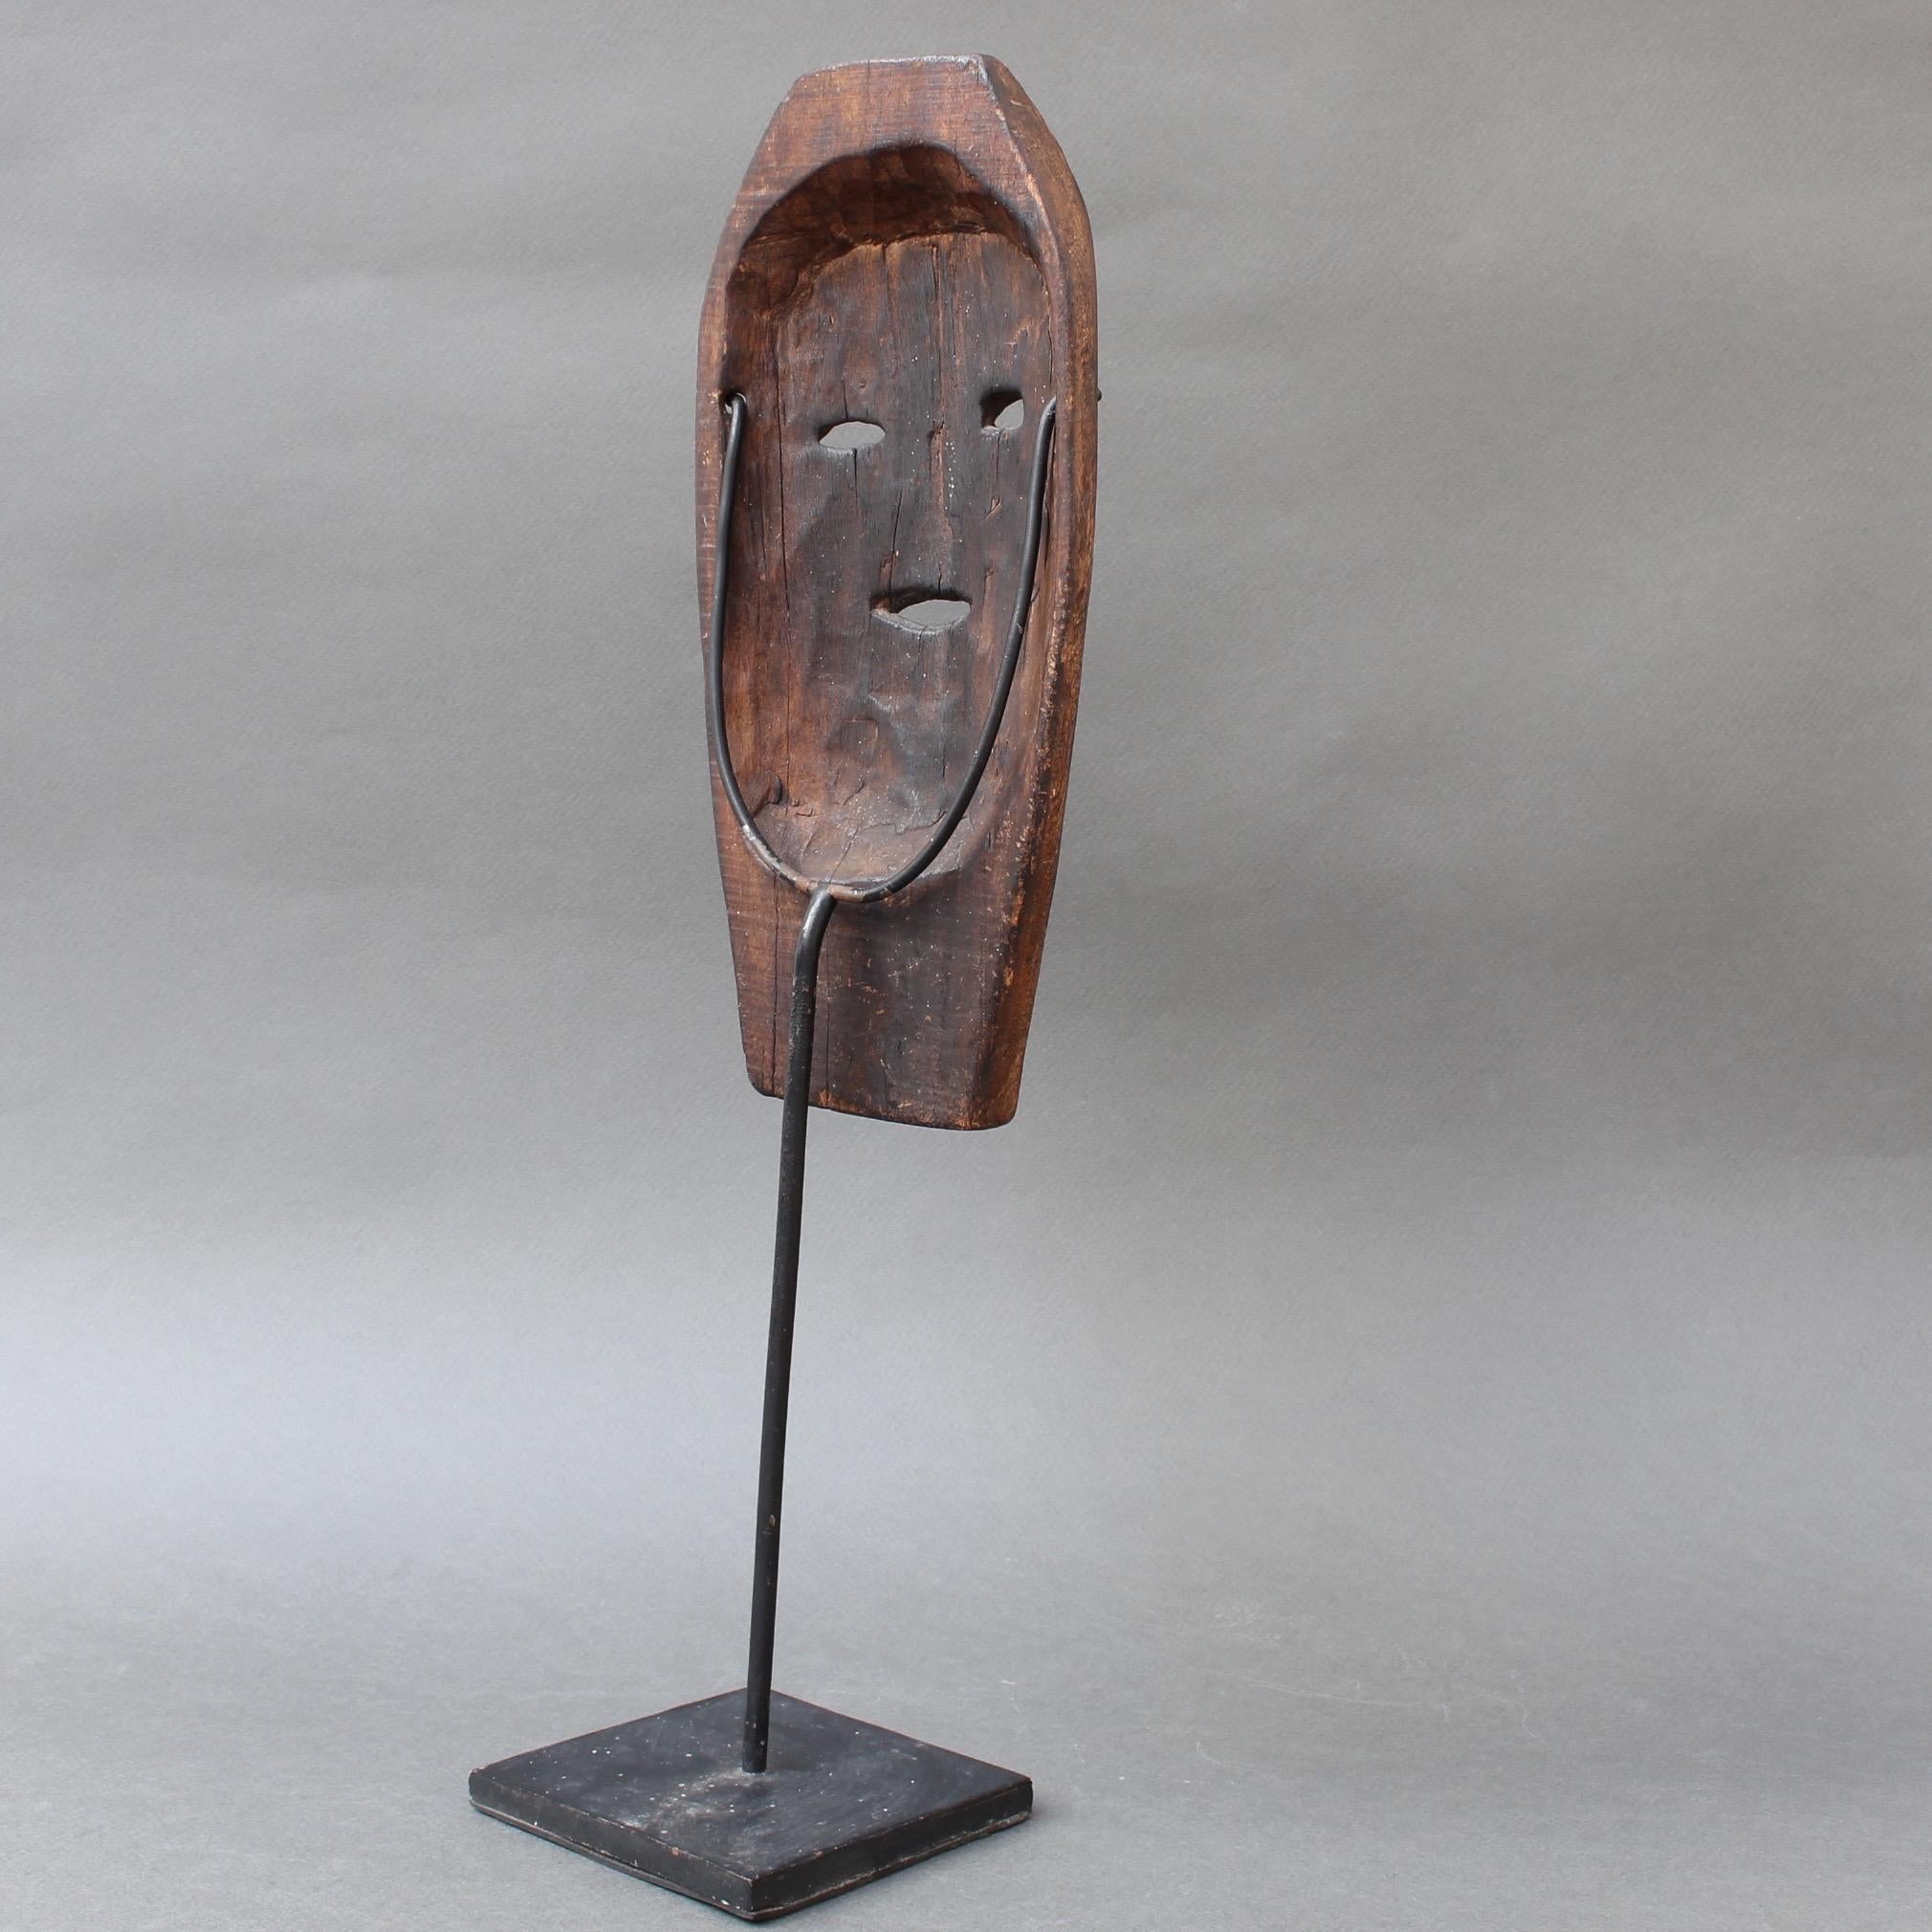 Indonesian Midcentury Sculpted Wooden Traditional Mask from Timor Island, Indonesia